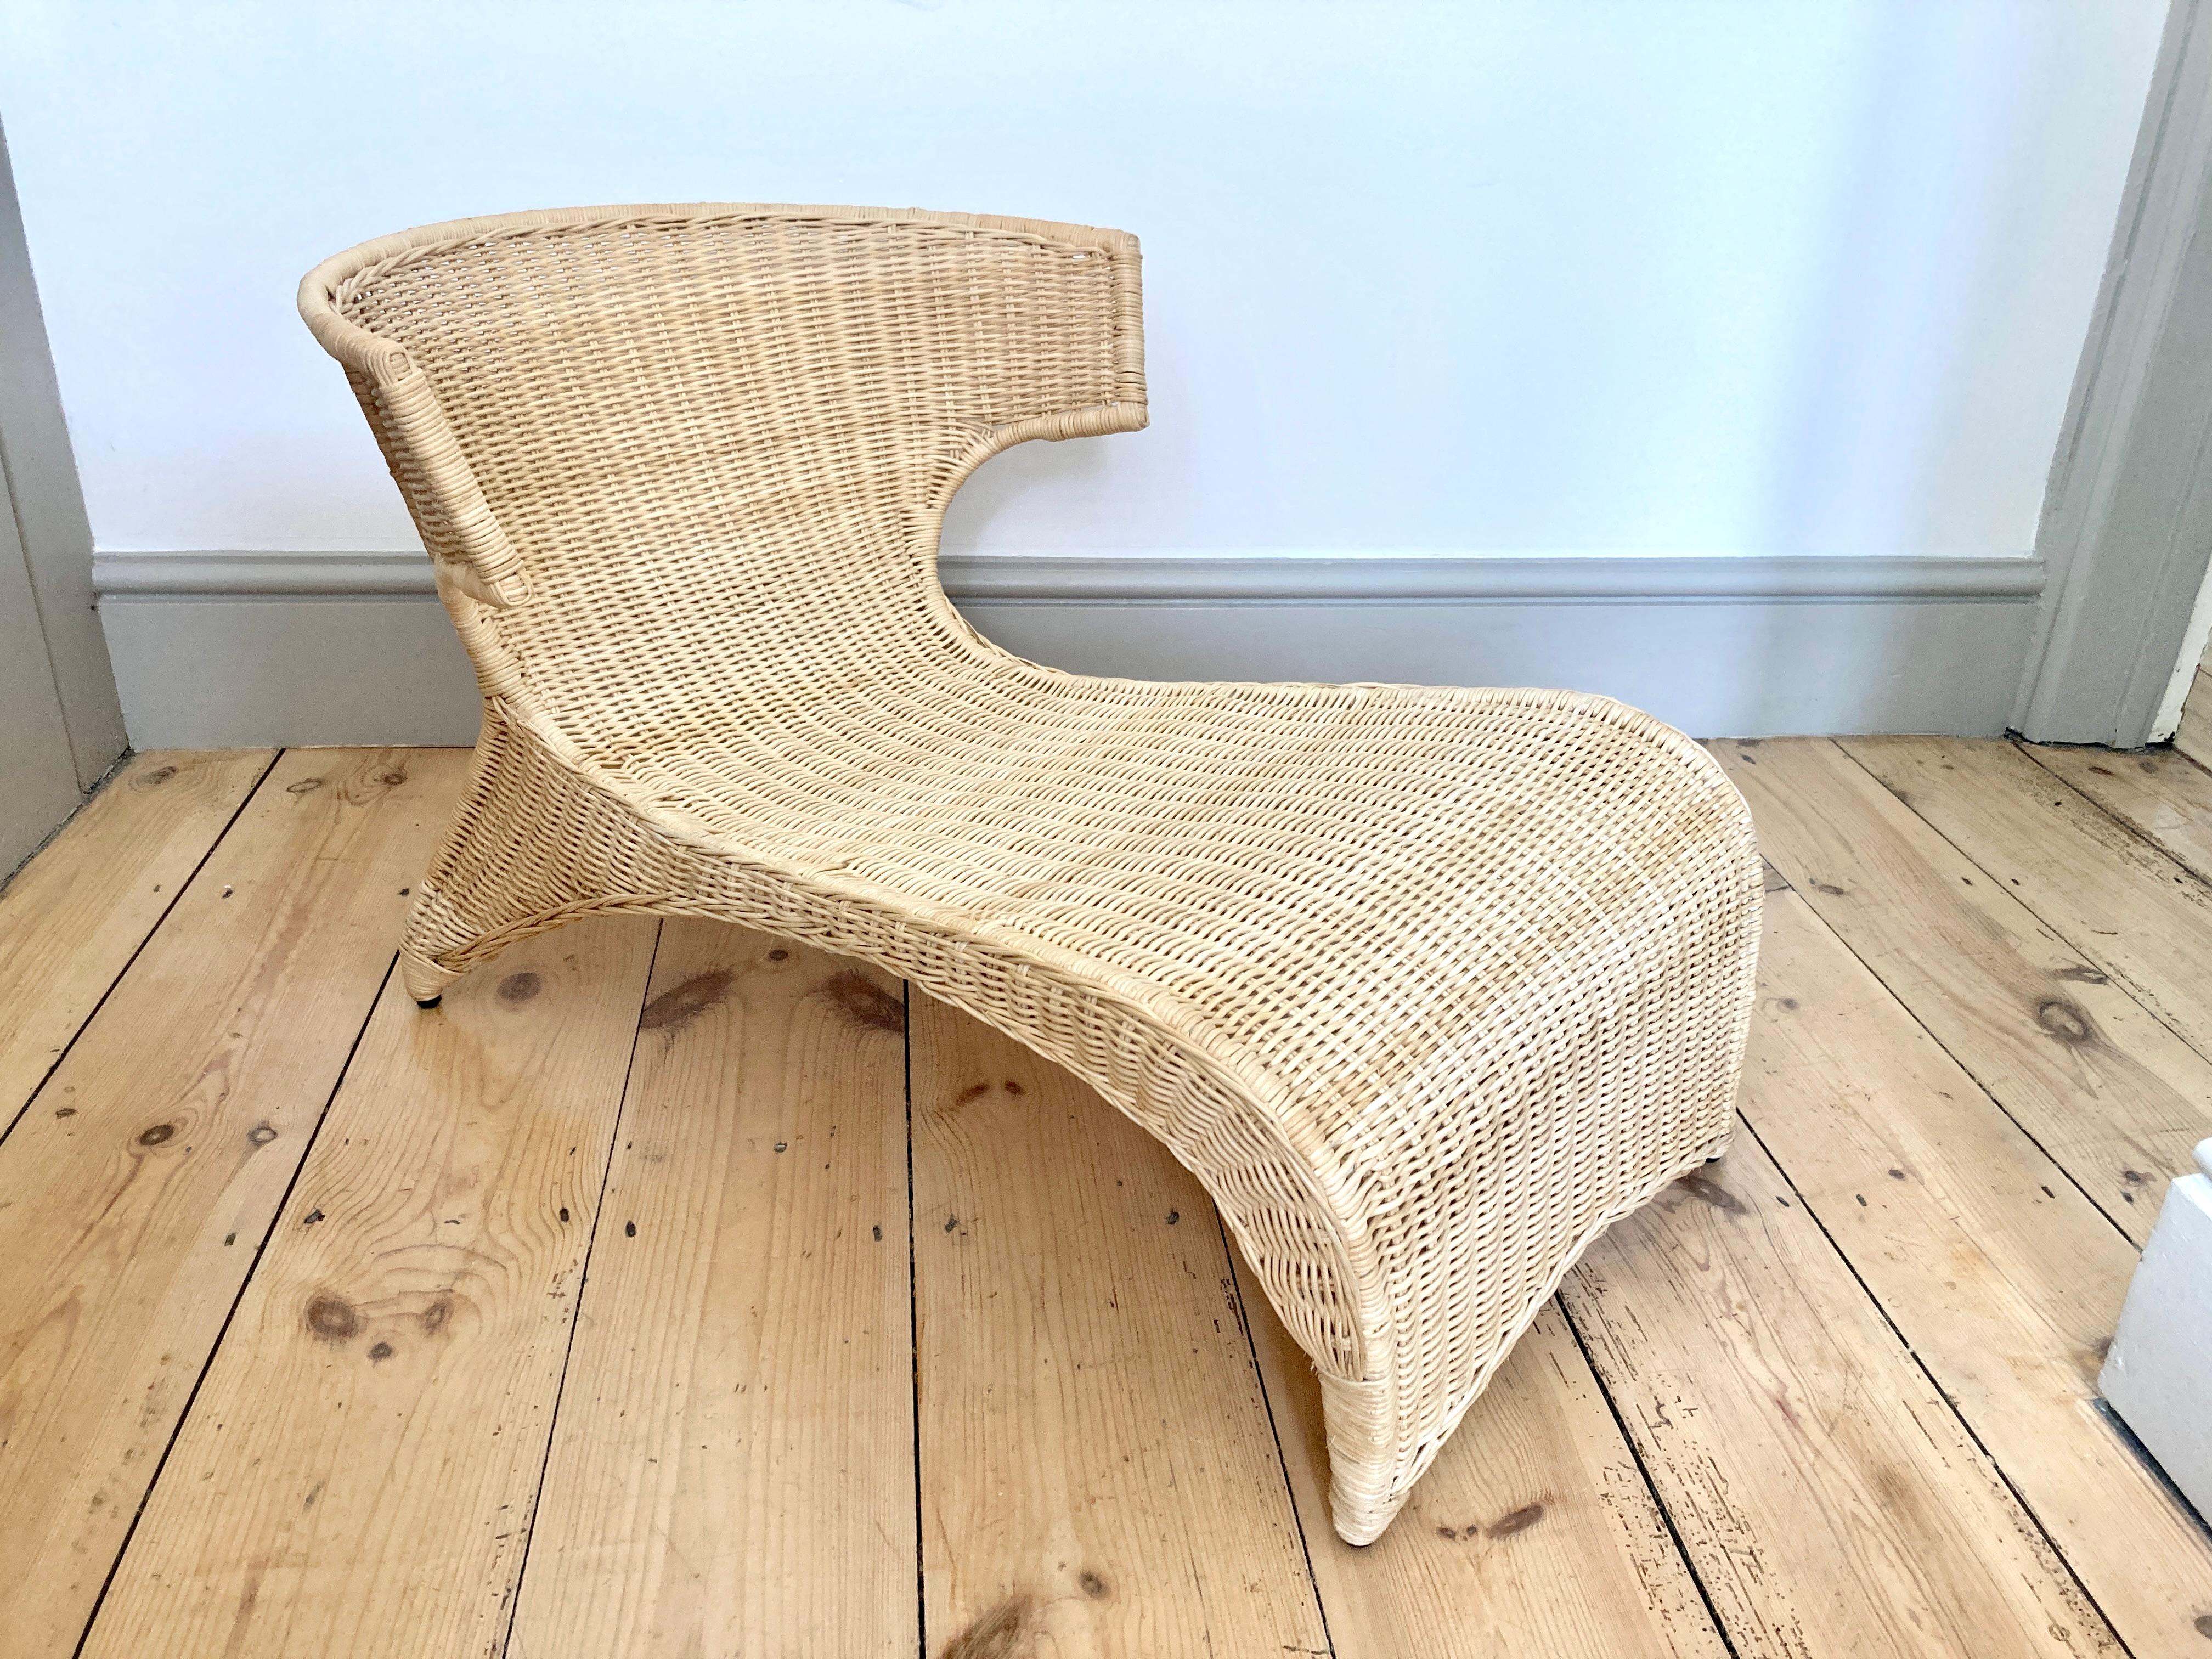 Savo chair designed in 2001 by Monika Mulder for IKEA in a light natural finish

Made from natural rattan weave over a metal frame.

Great design, a comfortable, low slung chair.

The chair is in excellent condition, rarely used, in very clean